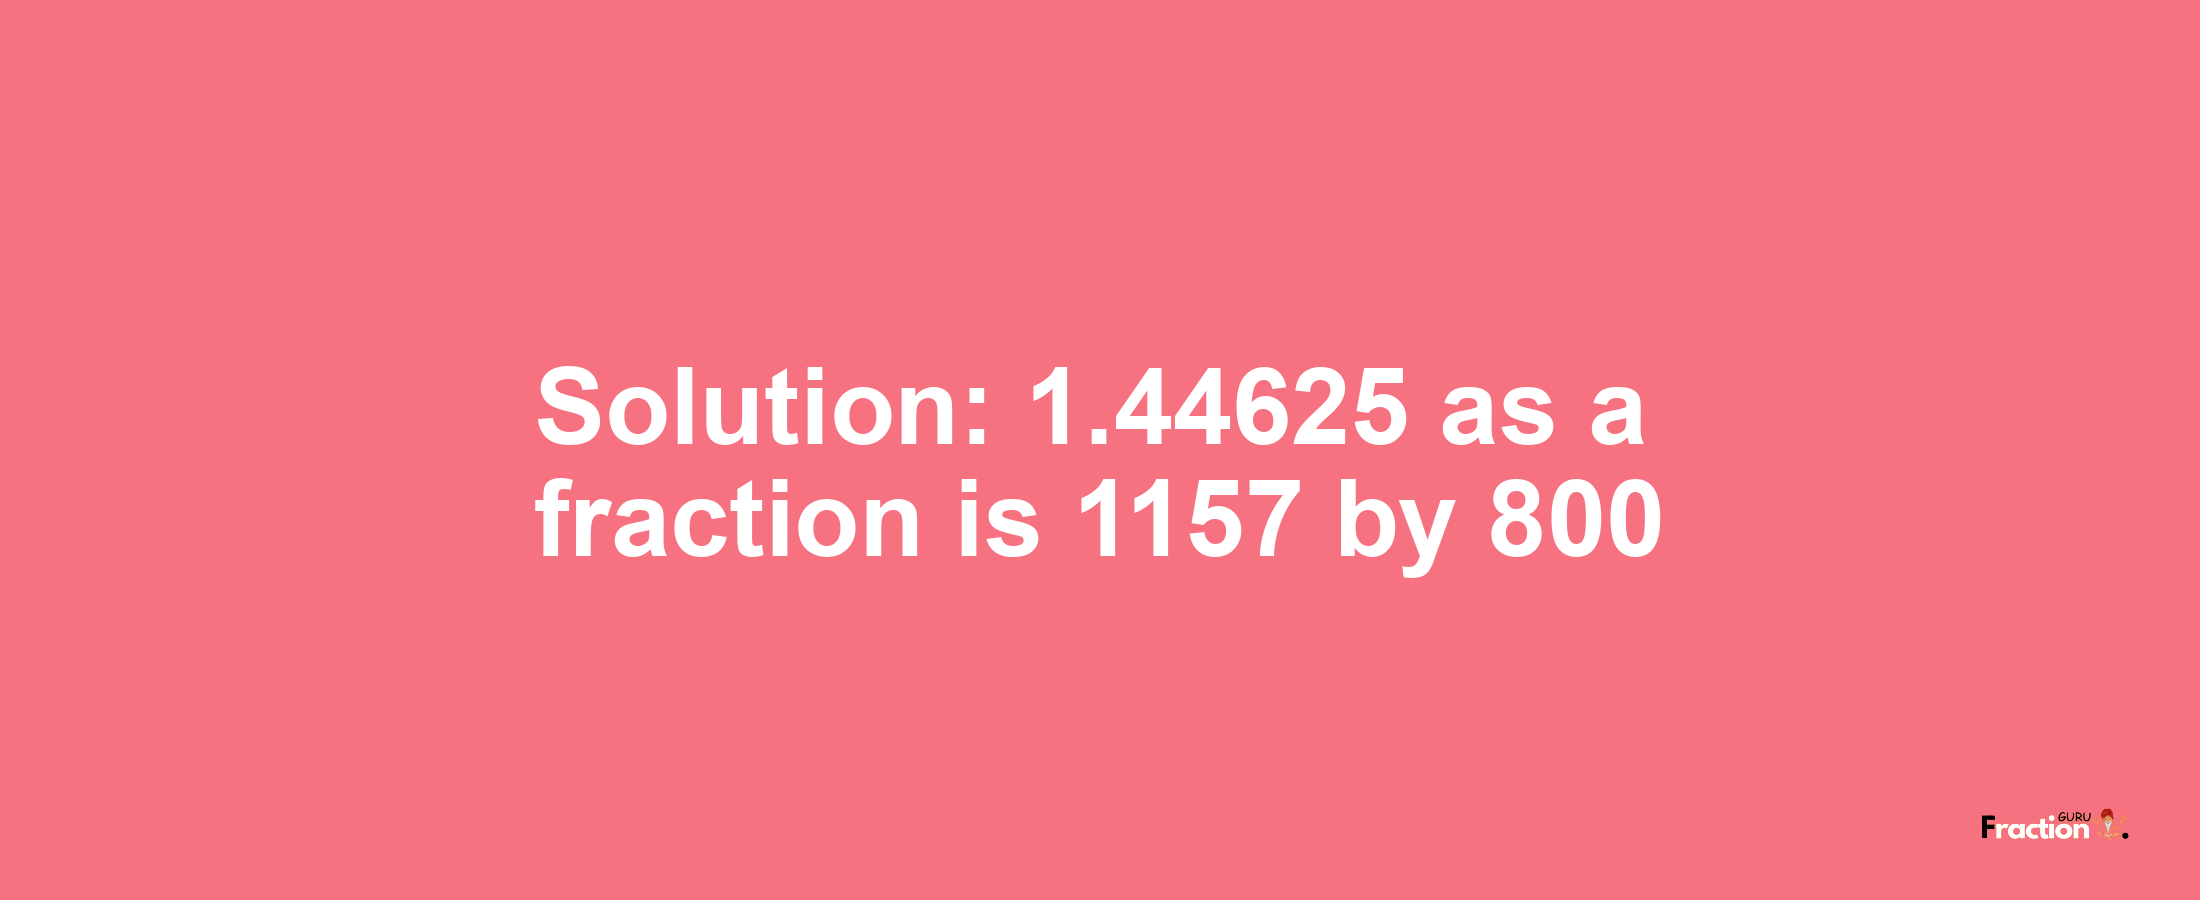 Solution:1.44625 as a fraction is 1157/800